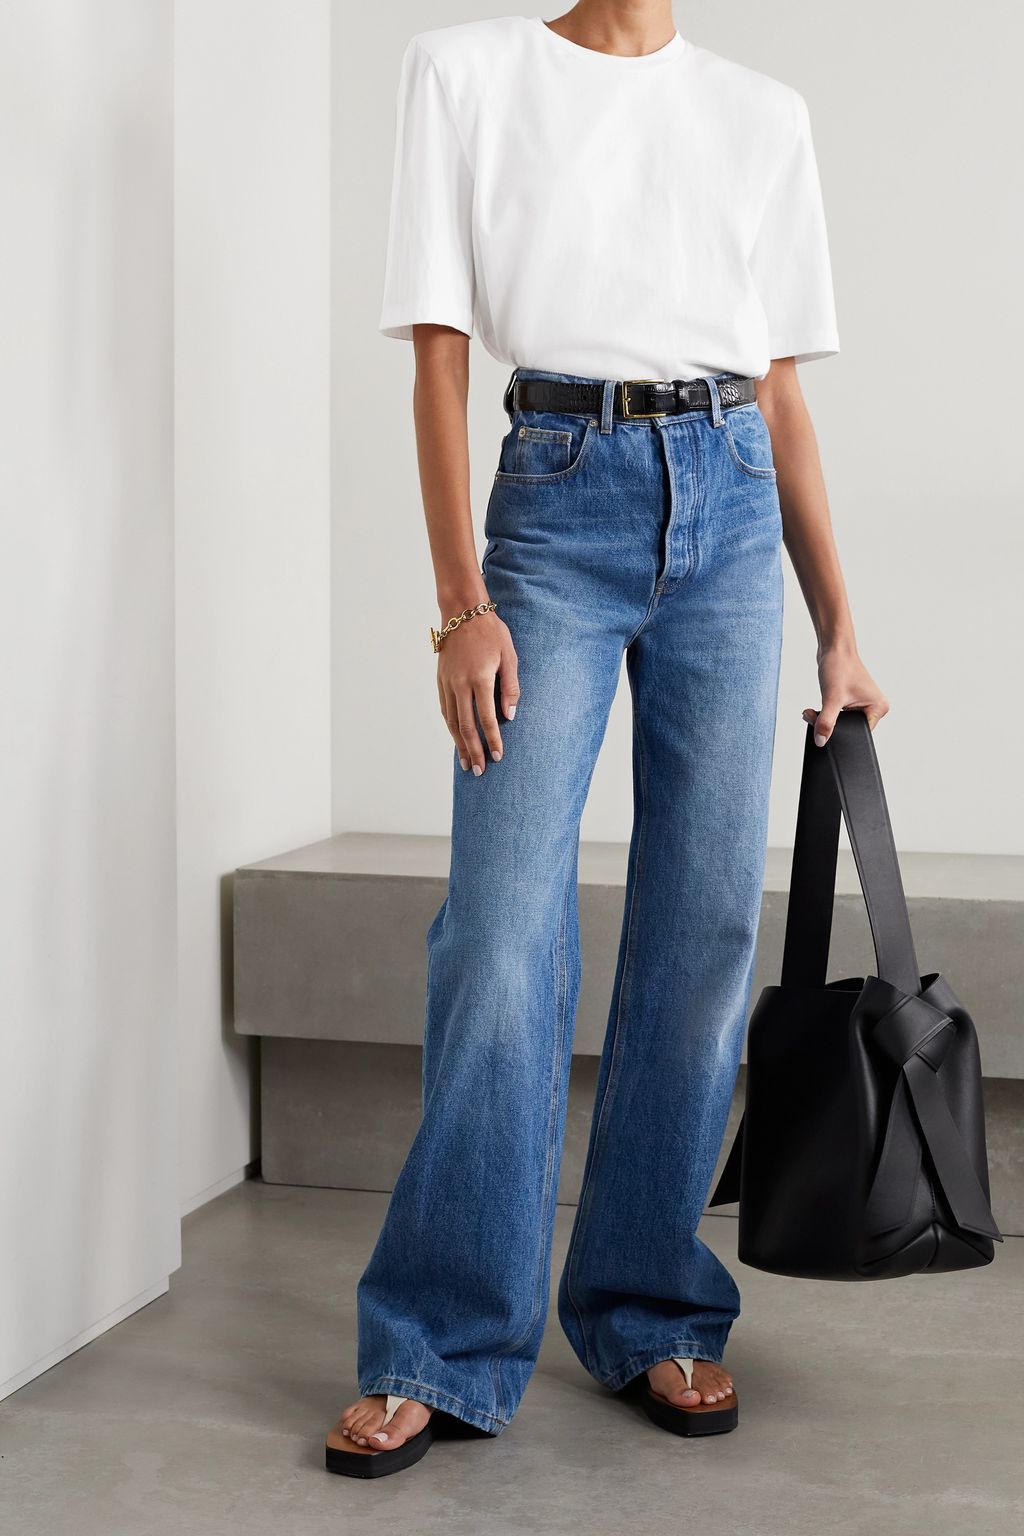 29 Finds From Net-a-Porter's 2022 Sale That Will Sell Out | Who What Wear